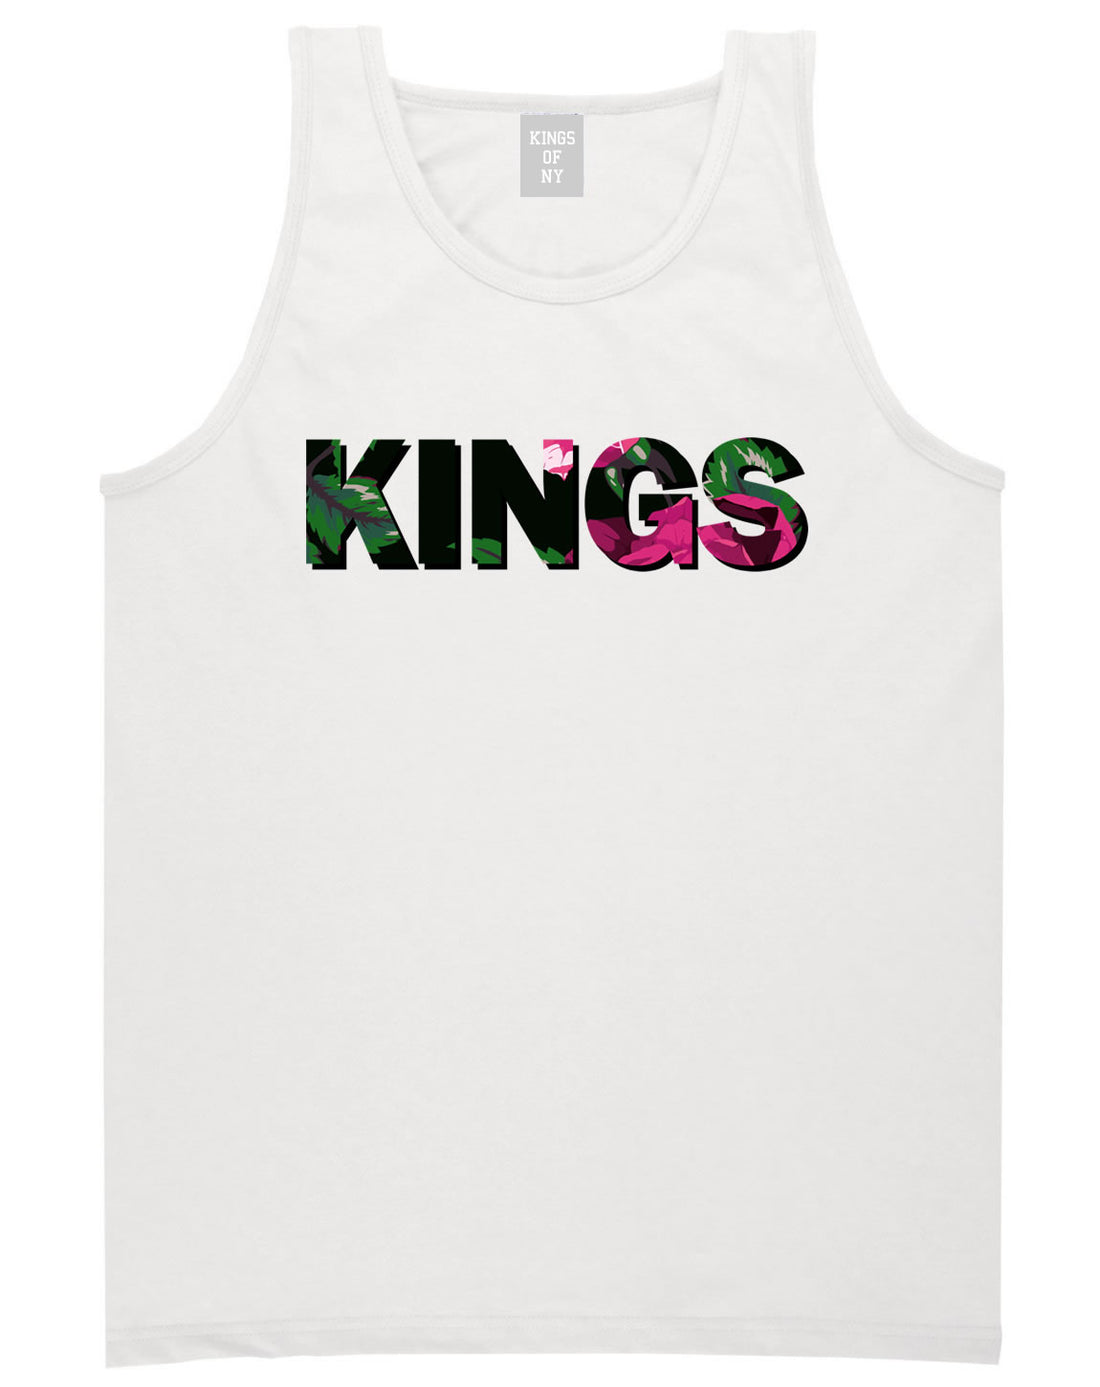 Kings Floral Print Pattern Tank Top in White by Kings Of NY